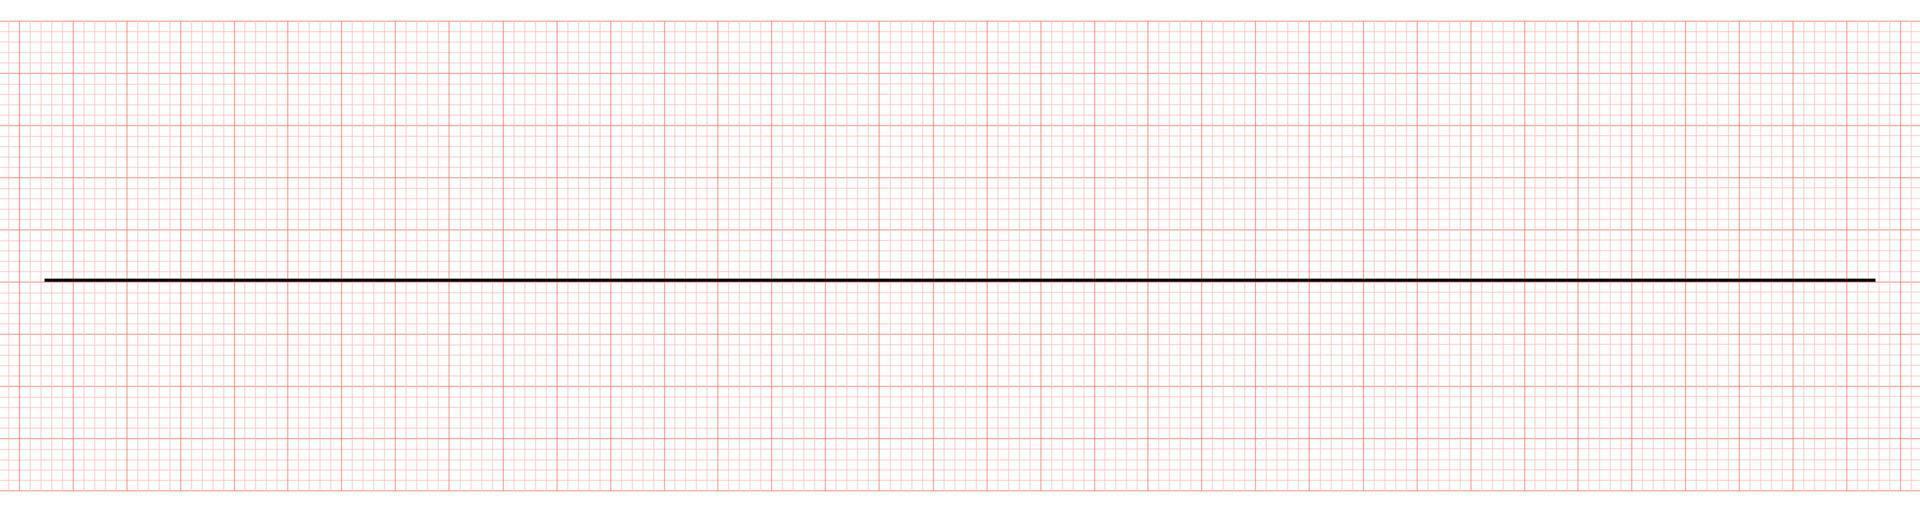 EKG Showing Flat Line or Asystole vector